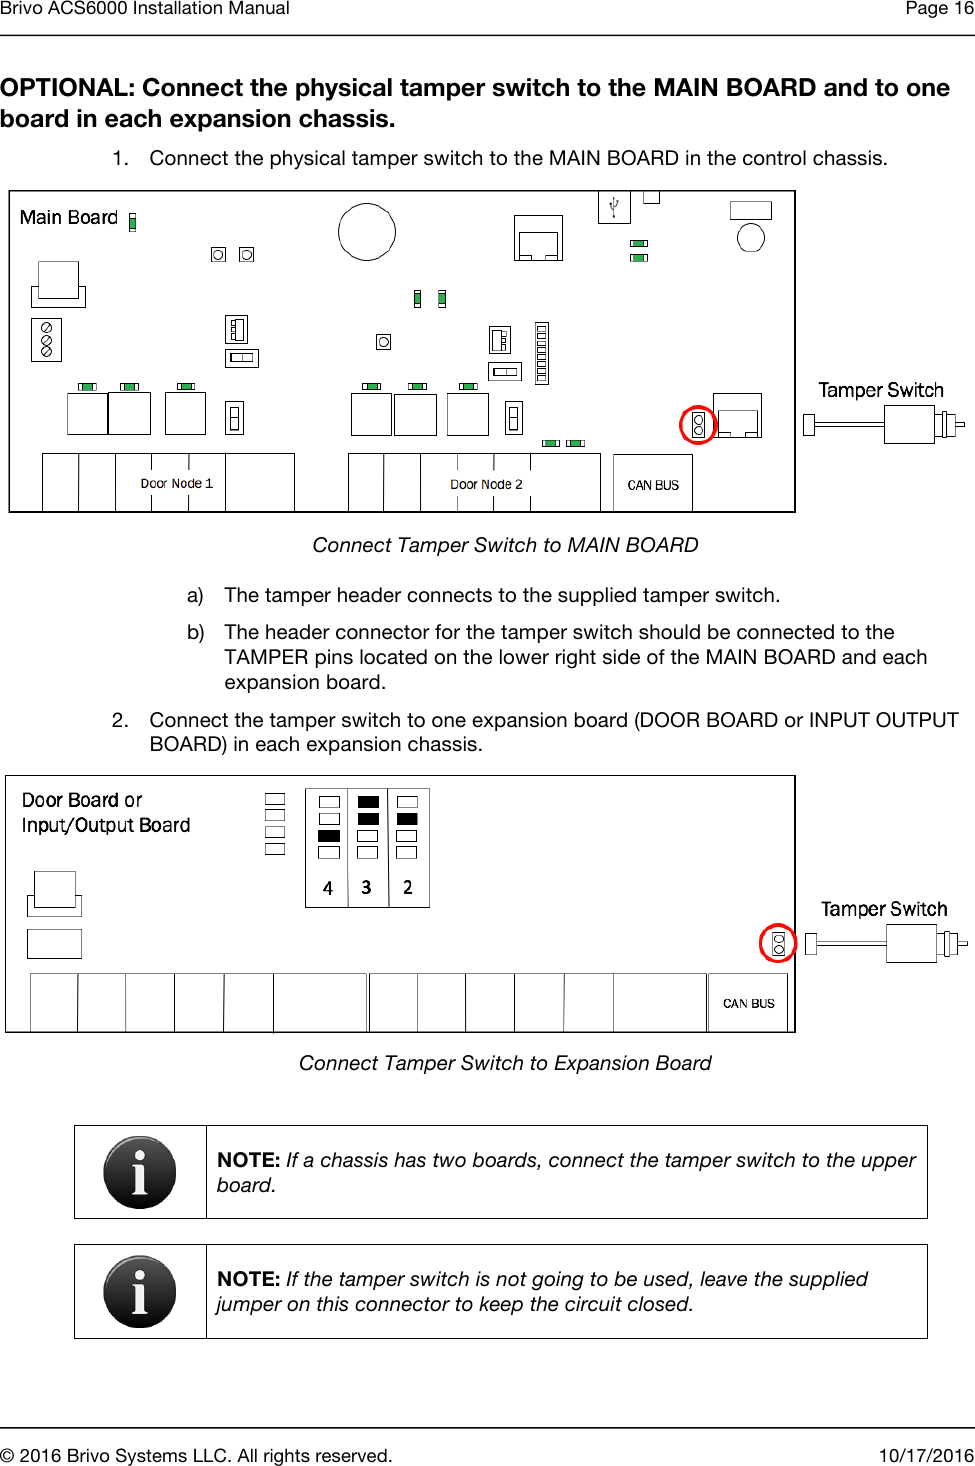 Brivo ACS6000 Installation Manual Page 16       © 2016 Brivo Systems LLC. All rights reserved. 10/17/2016  OPTIONAL: Connect the physical tamper switch to the MAIN BOARD and to one board in each expansion chassis. 1. Connect the physical tamper switch to the MAIN BOARD in the control chassis.  Connect Tamper Switch to MAIN BOARD a) The tamper header connects to the supplied tamper switch. b) The header connector for the tamper switch should be connected to the TAMPER pins located on the lower right side of the MAIN BOARD and each expansion board.  2. Connect the tamper switch to one expansion board (DOOR BOARD or INPUT OUTPUT BOARD) in each expansion chassis.  Connect Tamper Switch to Expansion Board   NOTE: If a chassis has two boards, connect the tamper switch to the upper board.   NOTE: If the tamper switch is not going to be used, leave the supplied jumper on this connector to keep the circuit closed.  